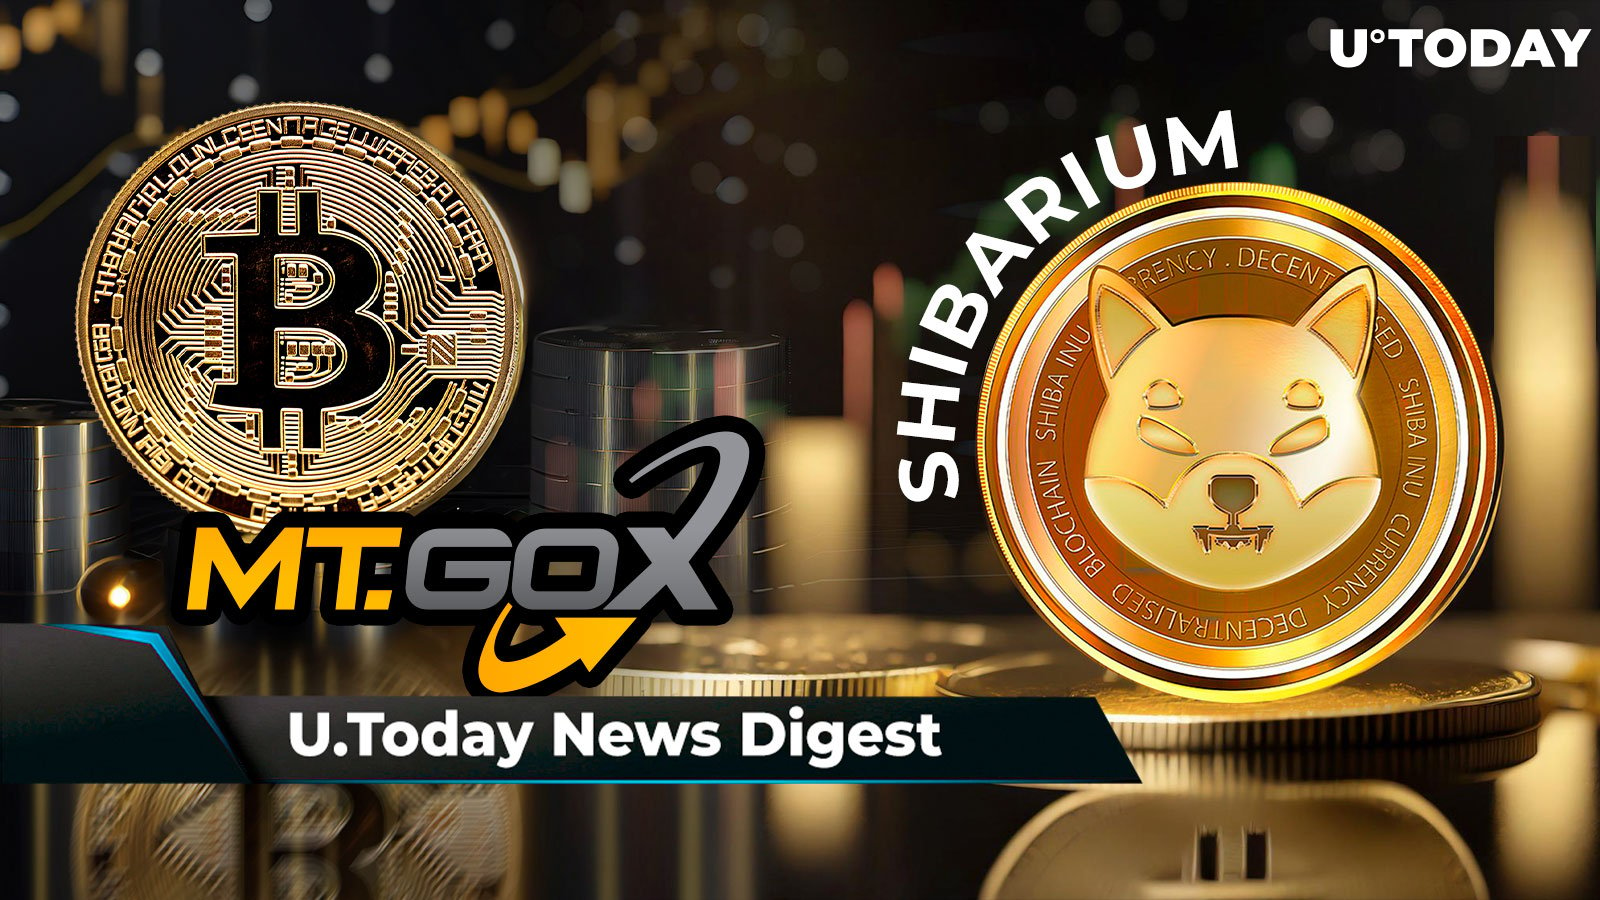 Mt. Gox Started Sending $2.4 Billion in Bitcoin, Shibarium Skyrockets With 450% New Users, Ripple Doing 'A Lot Less Hiring' in U.S., Garlinghouse Says: Crypto News Digest by U.Today